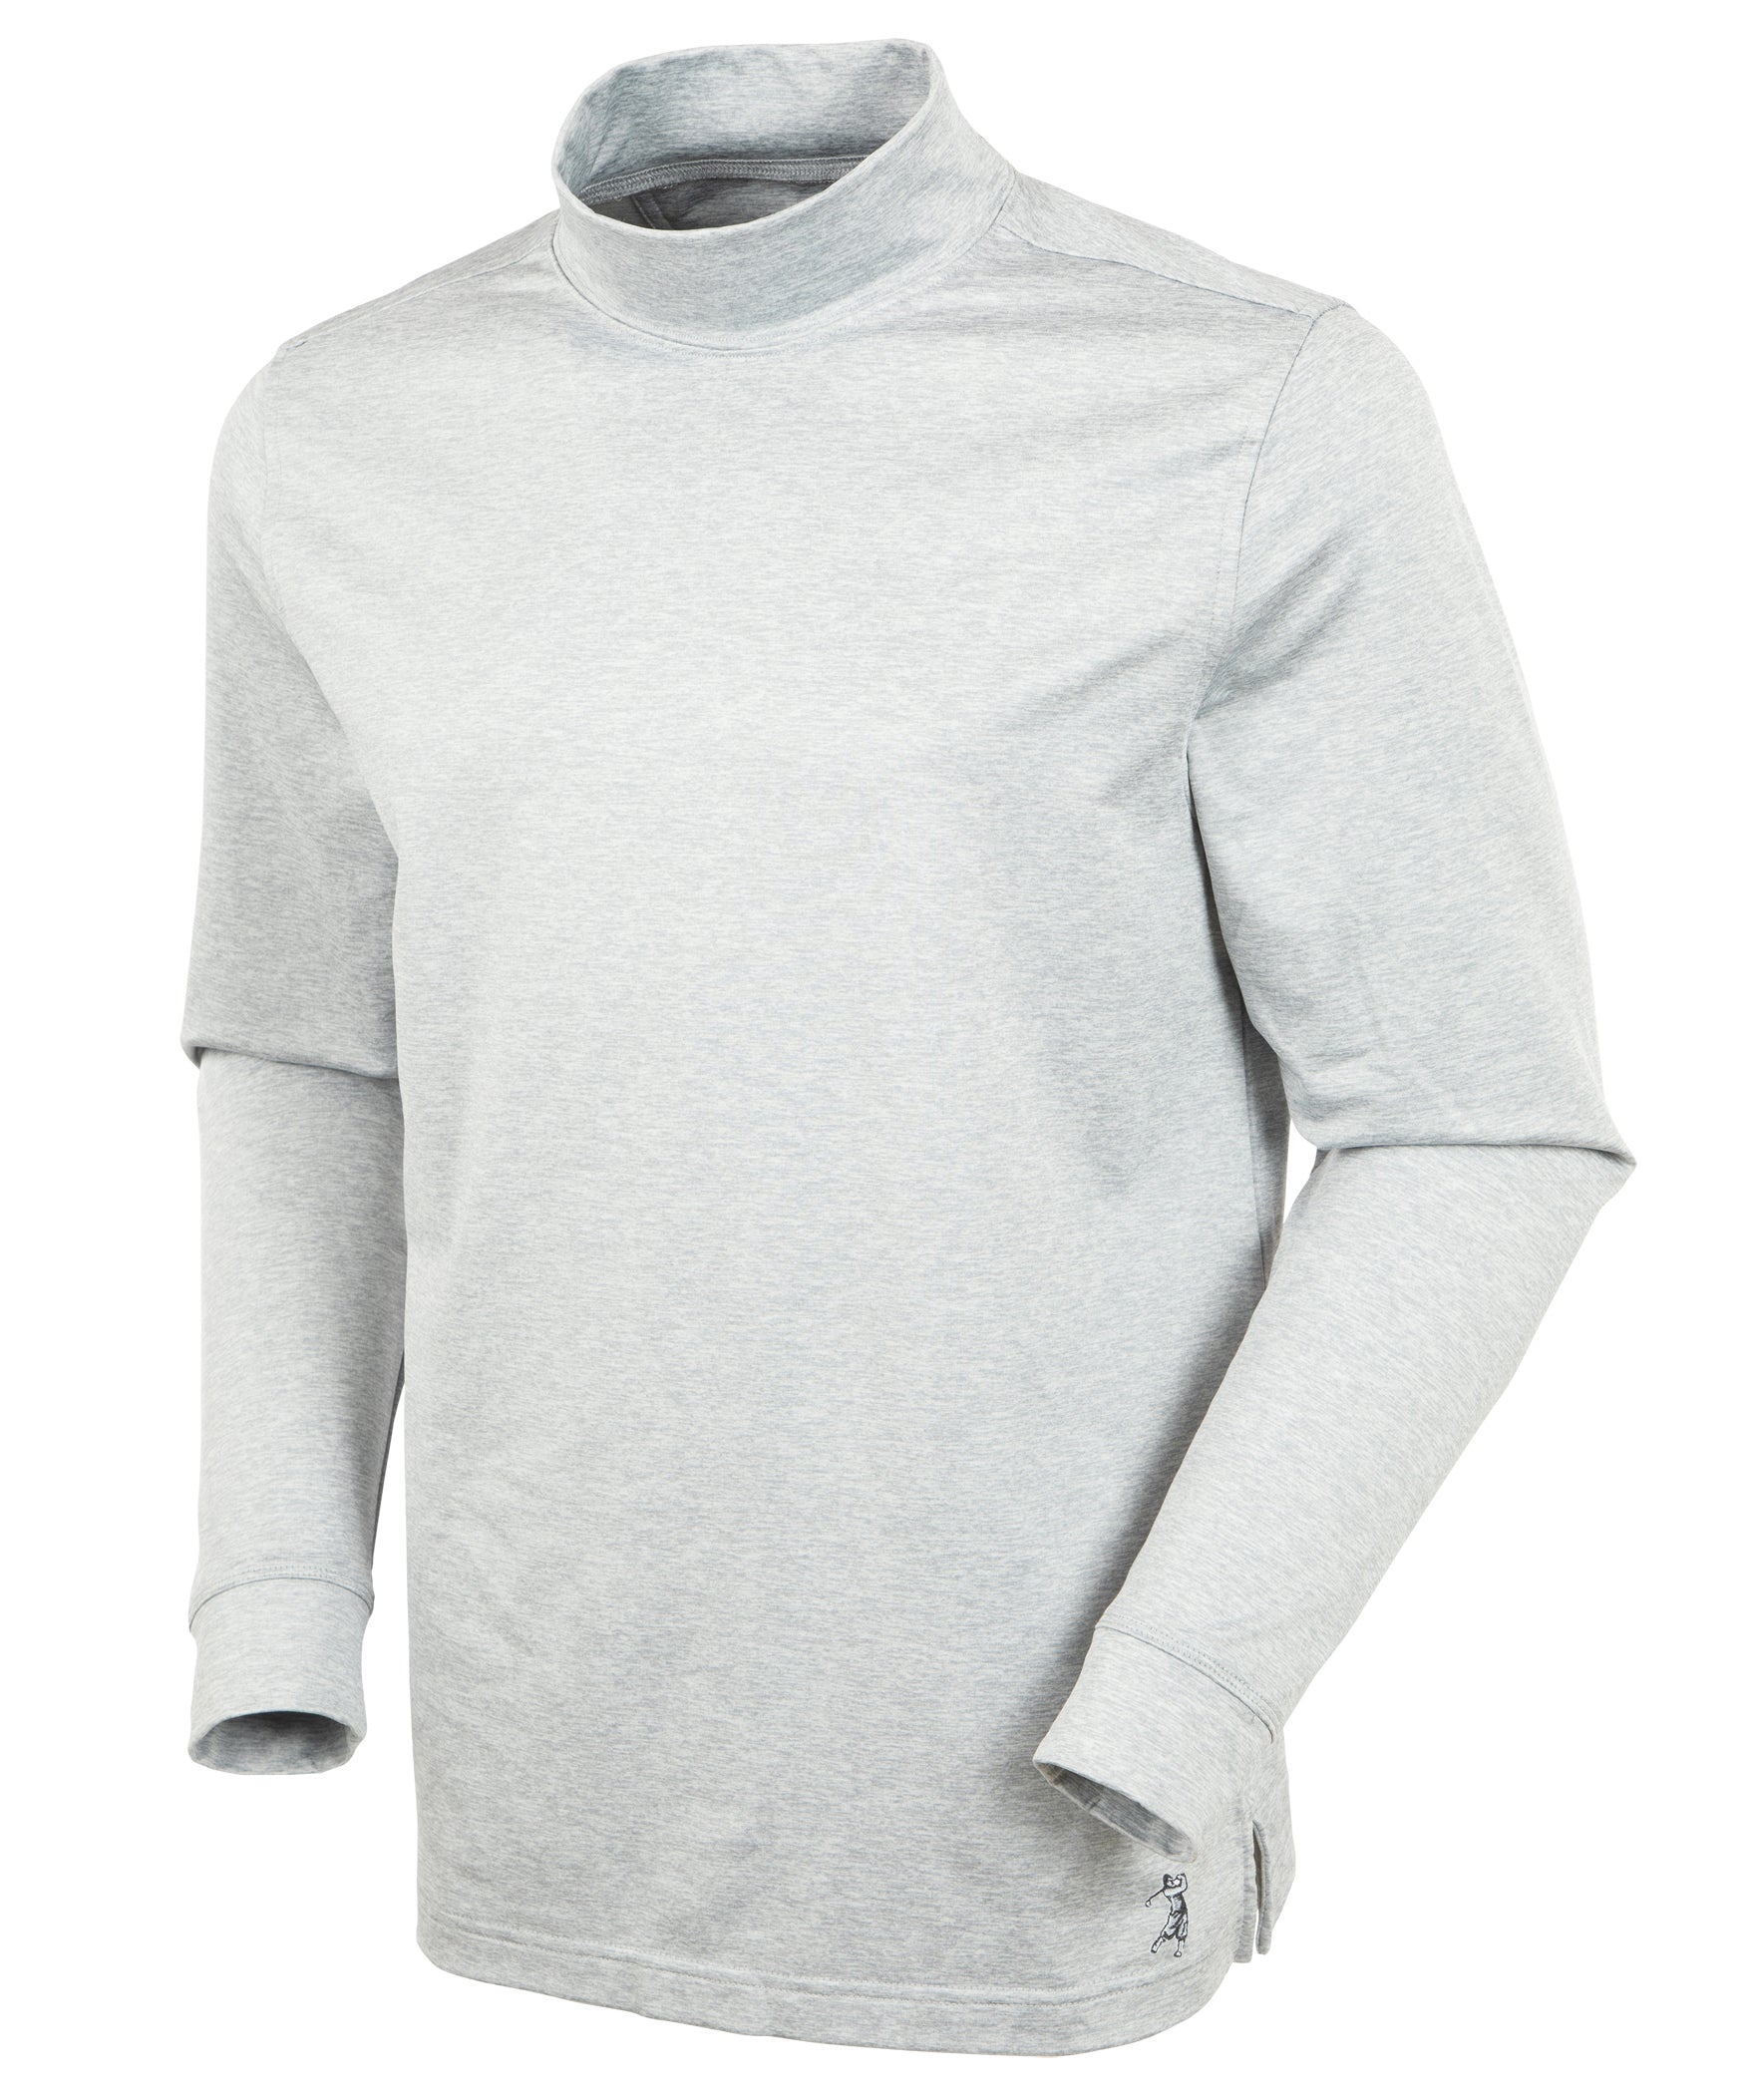 Men Turtle Neck Long Sleeves Stretchy Shirt White S